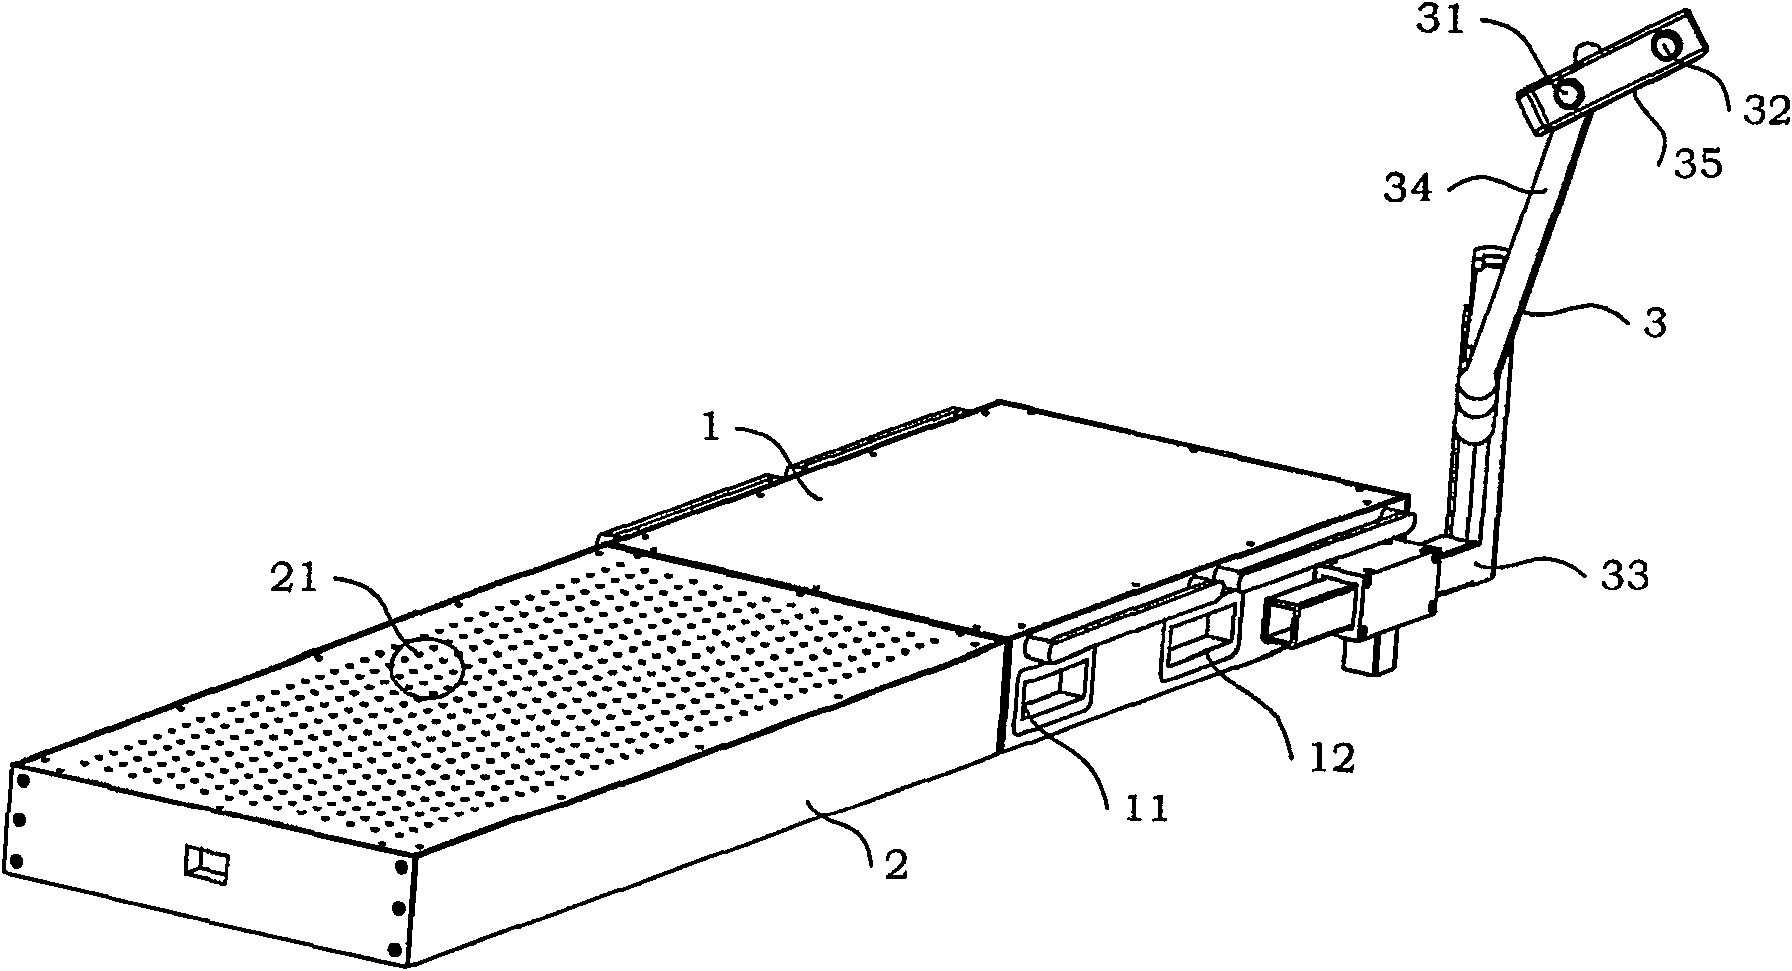 Digital operating bed system with double-plane positioning and double-eyes visual tracting